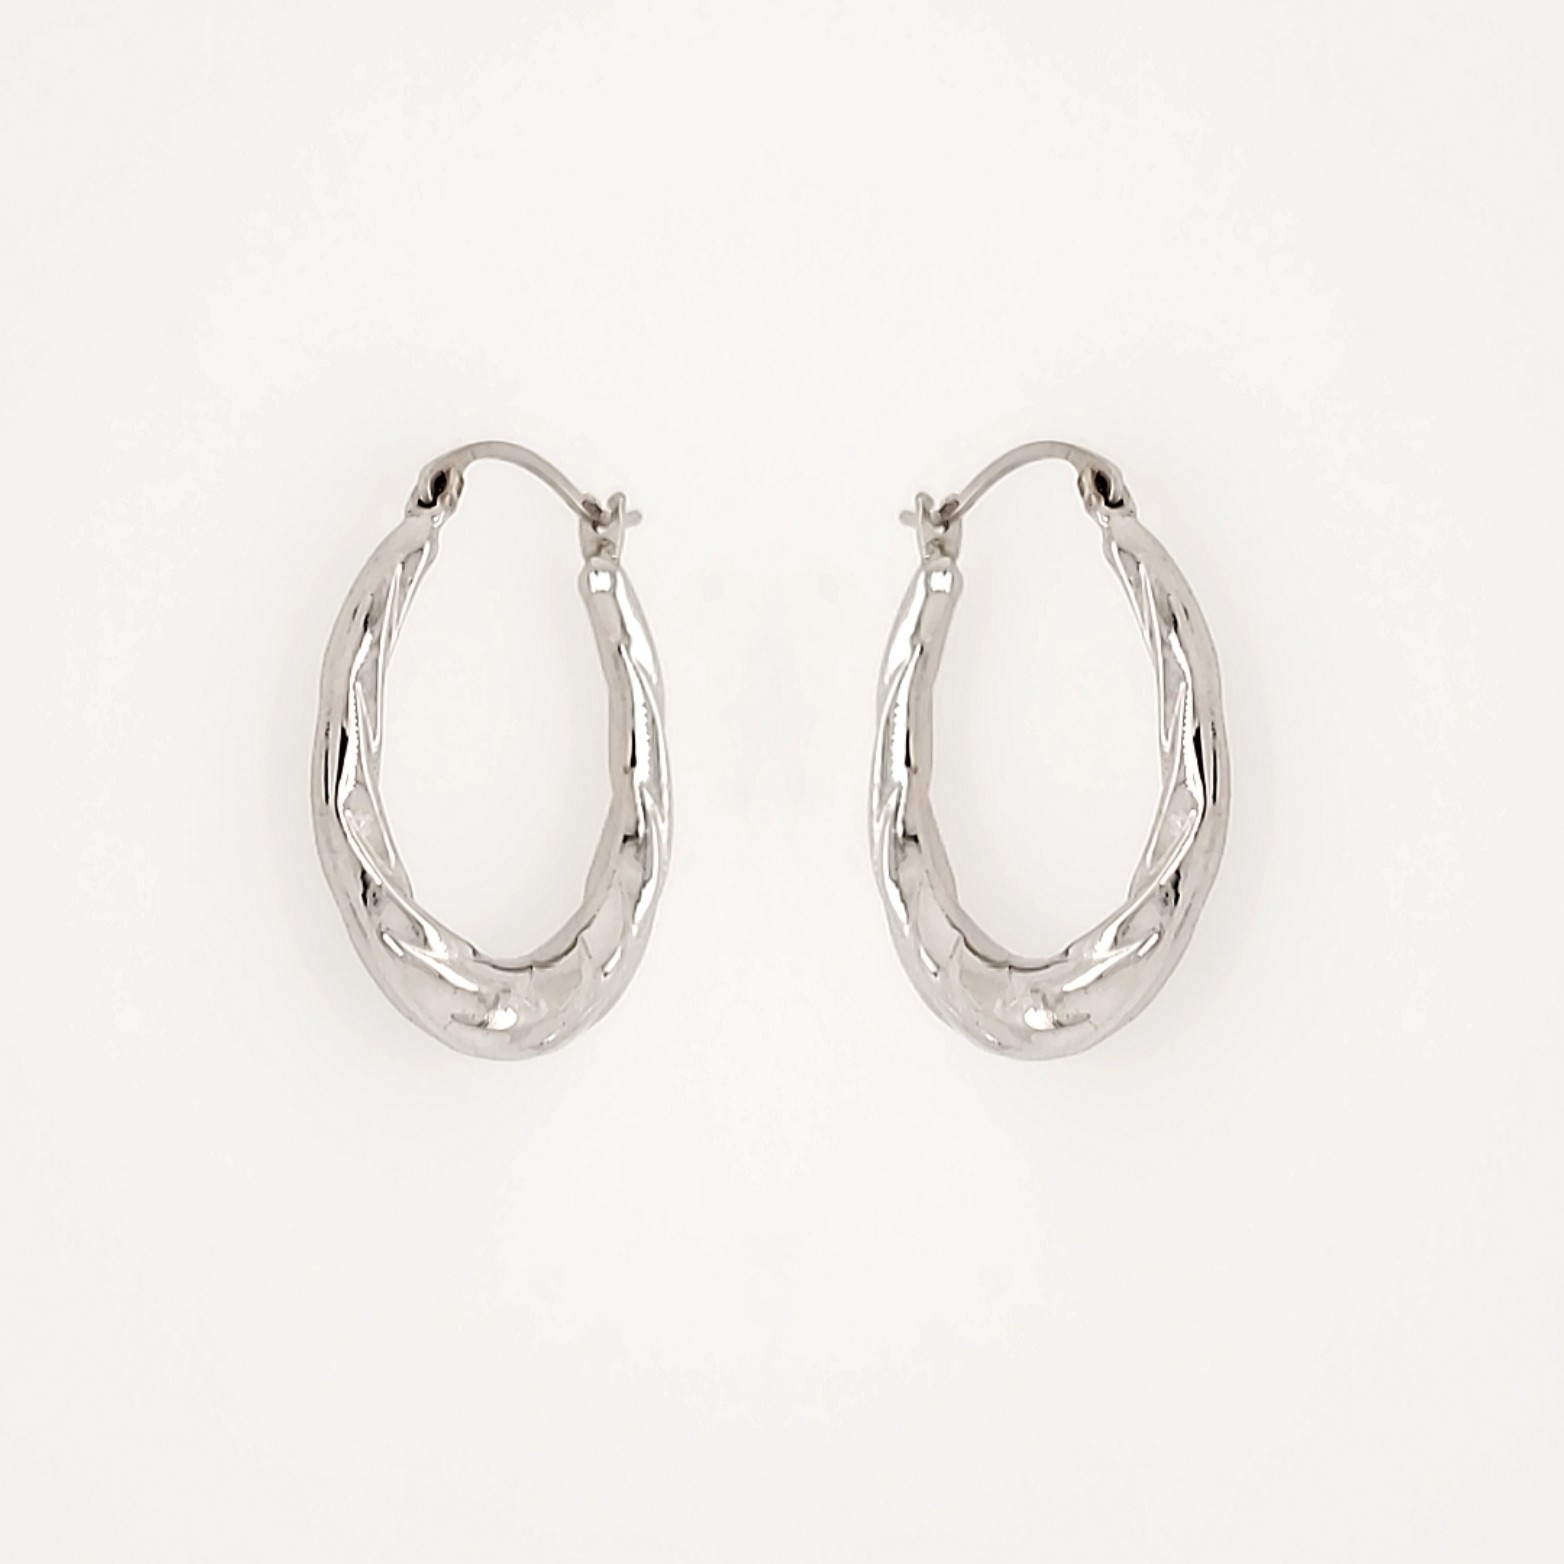 30567 14K WHITE GOLD 0.80" FLAT TWISTED DESIGN HOOPS